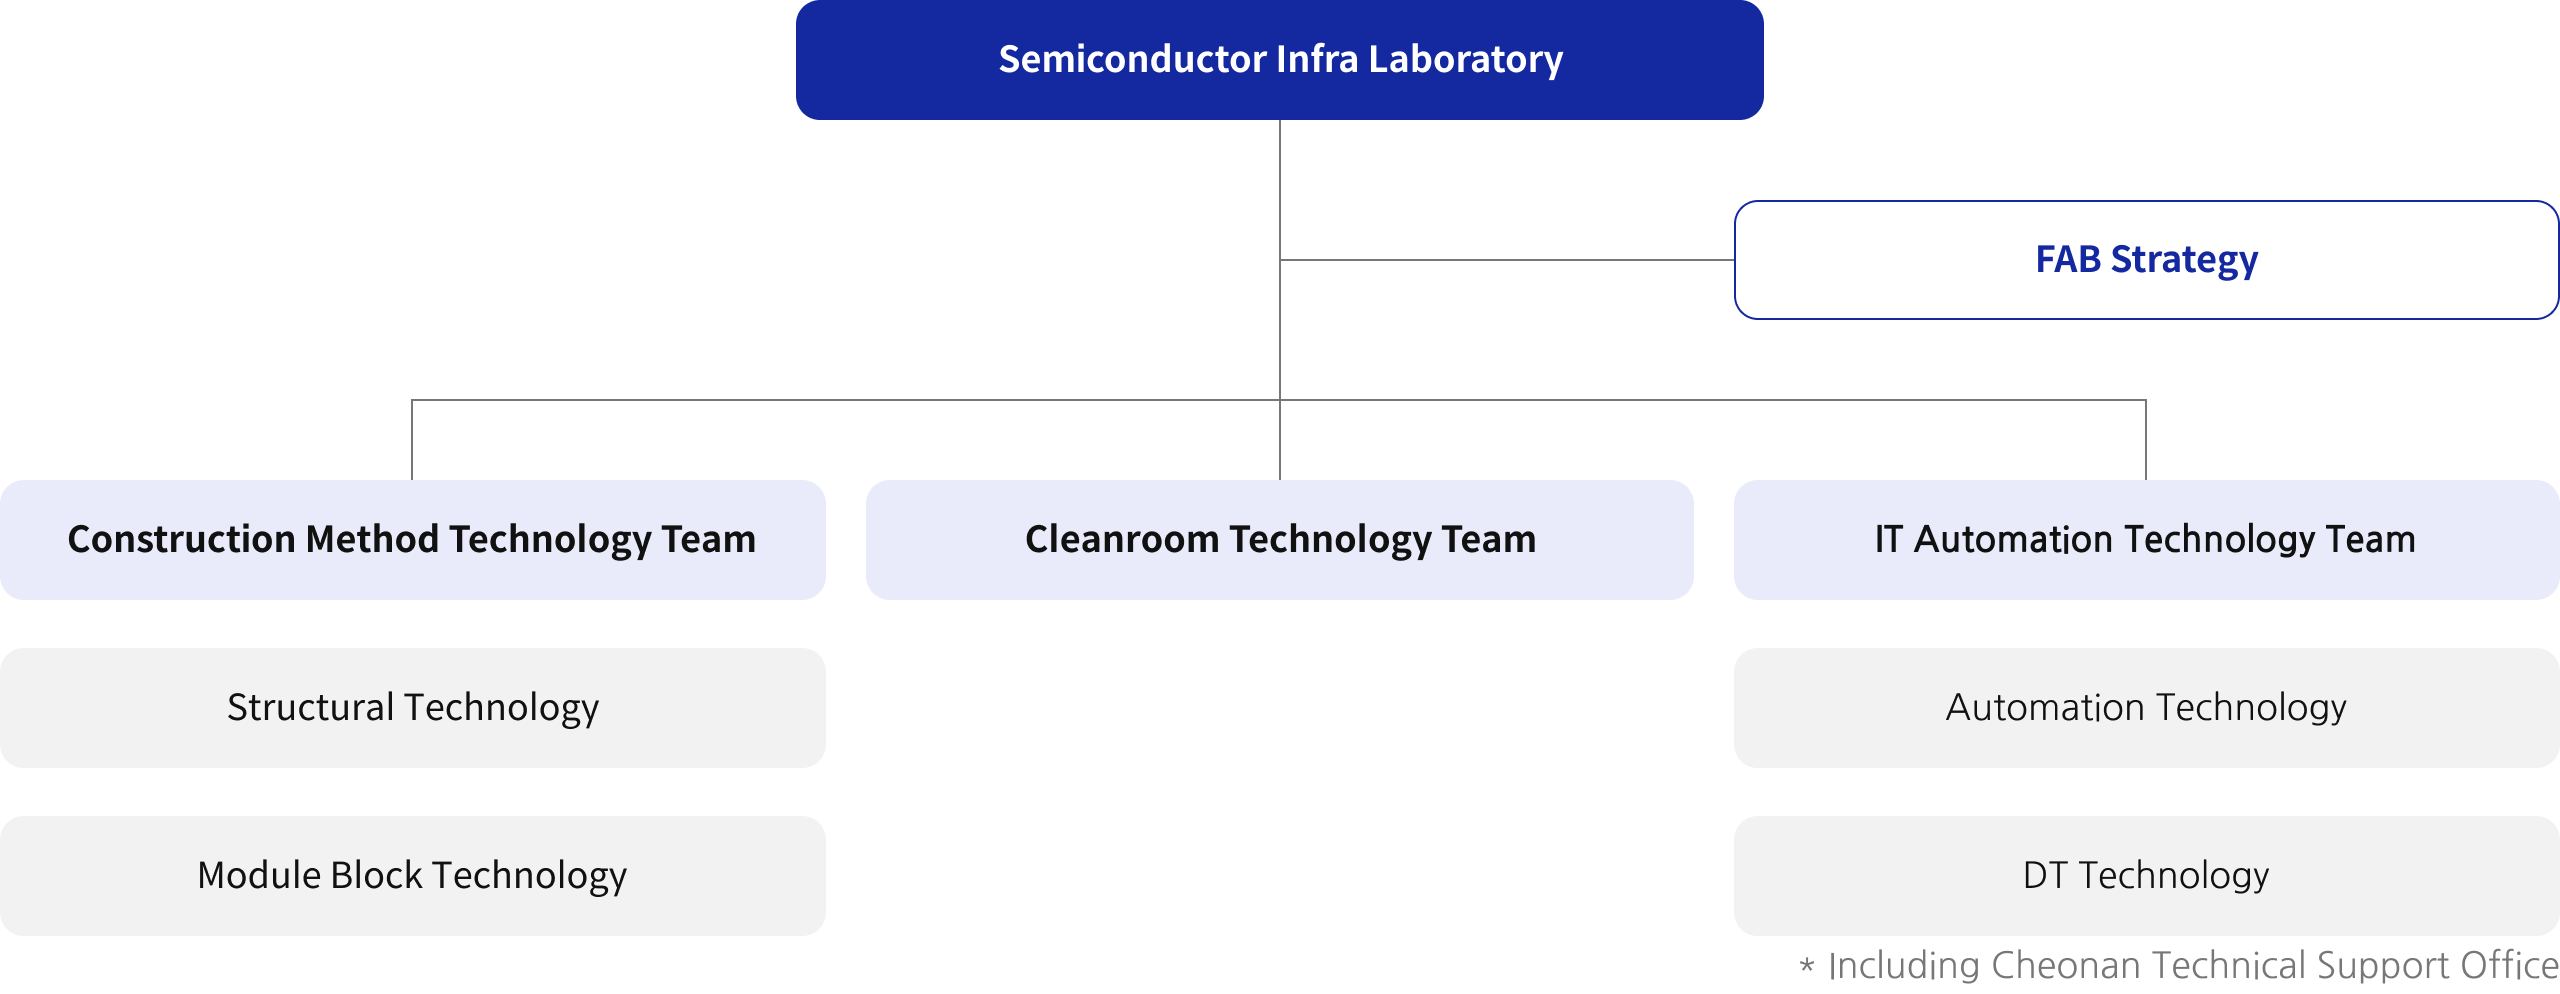 Semiconductor Infra Laboratory * FAB Strategy, Construction Method Technology Team Structural Technology Module Block Technology, Cleanroom Technology Team, IT Automation Technology Team Automation Technology DT Technology * Including Cheonan Technical Support Office